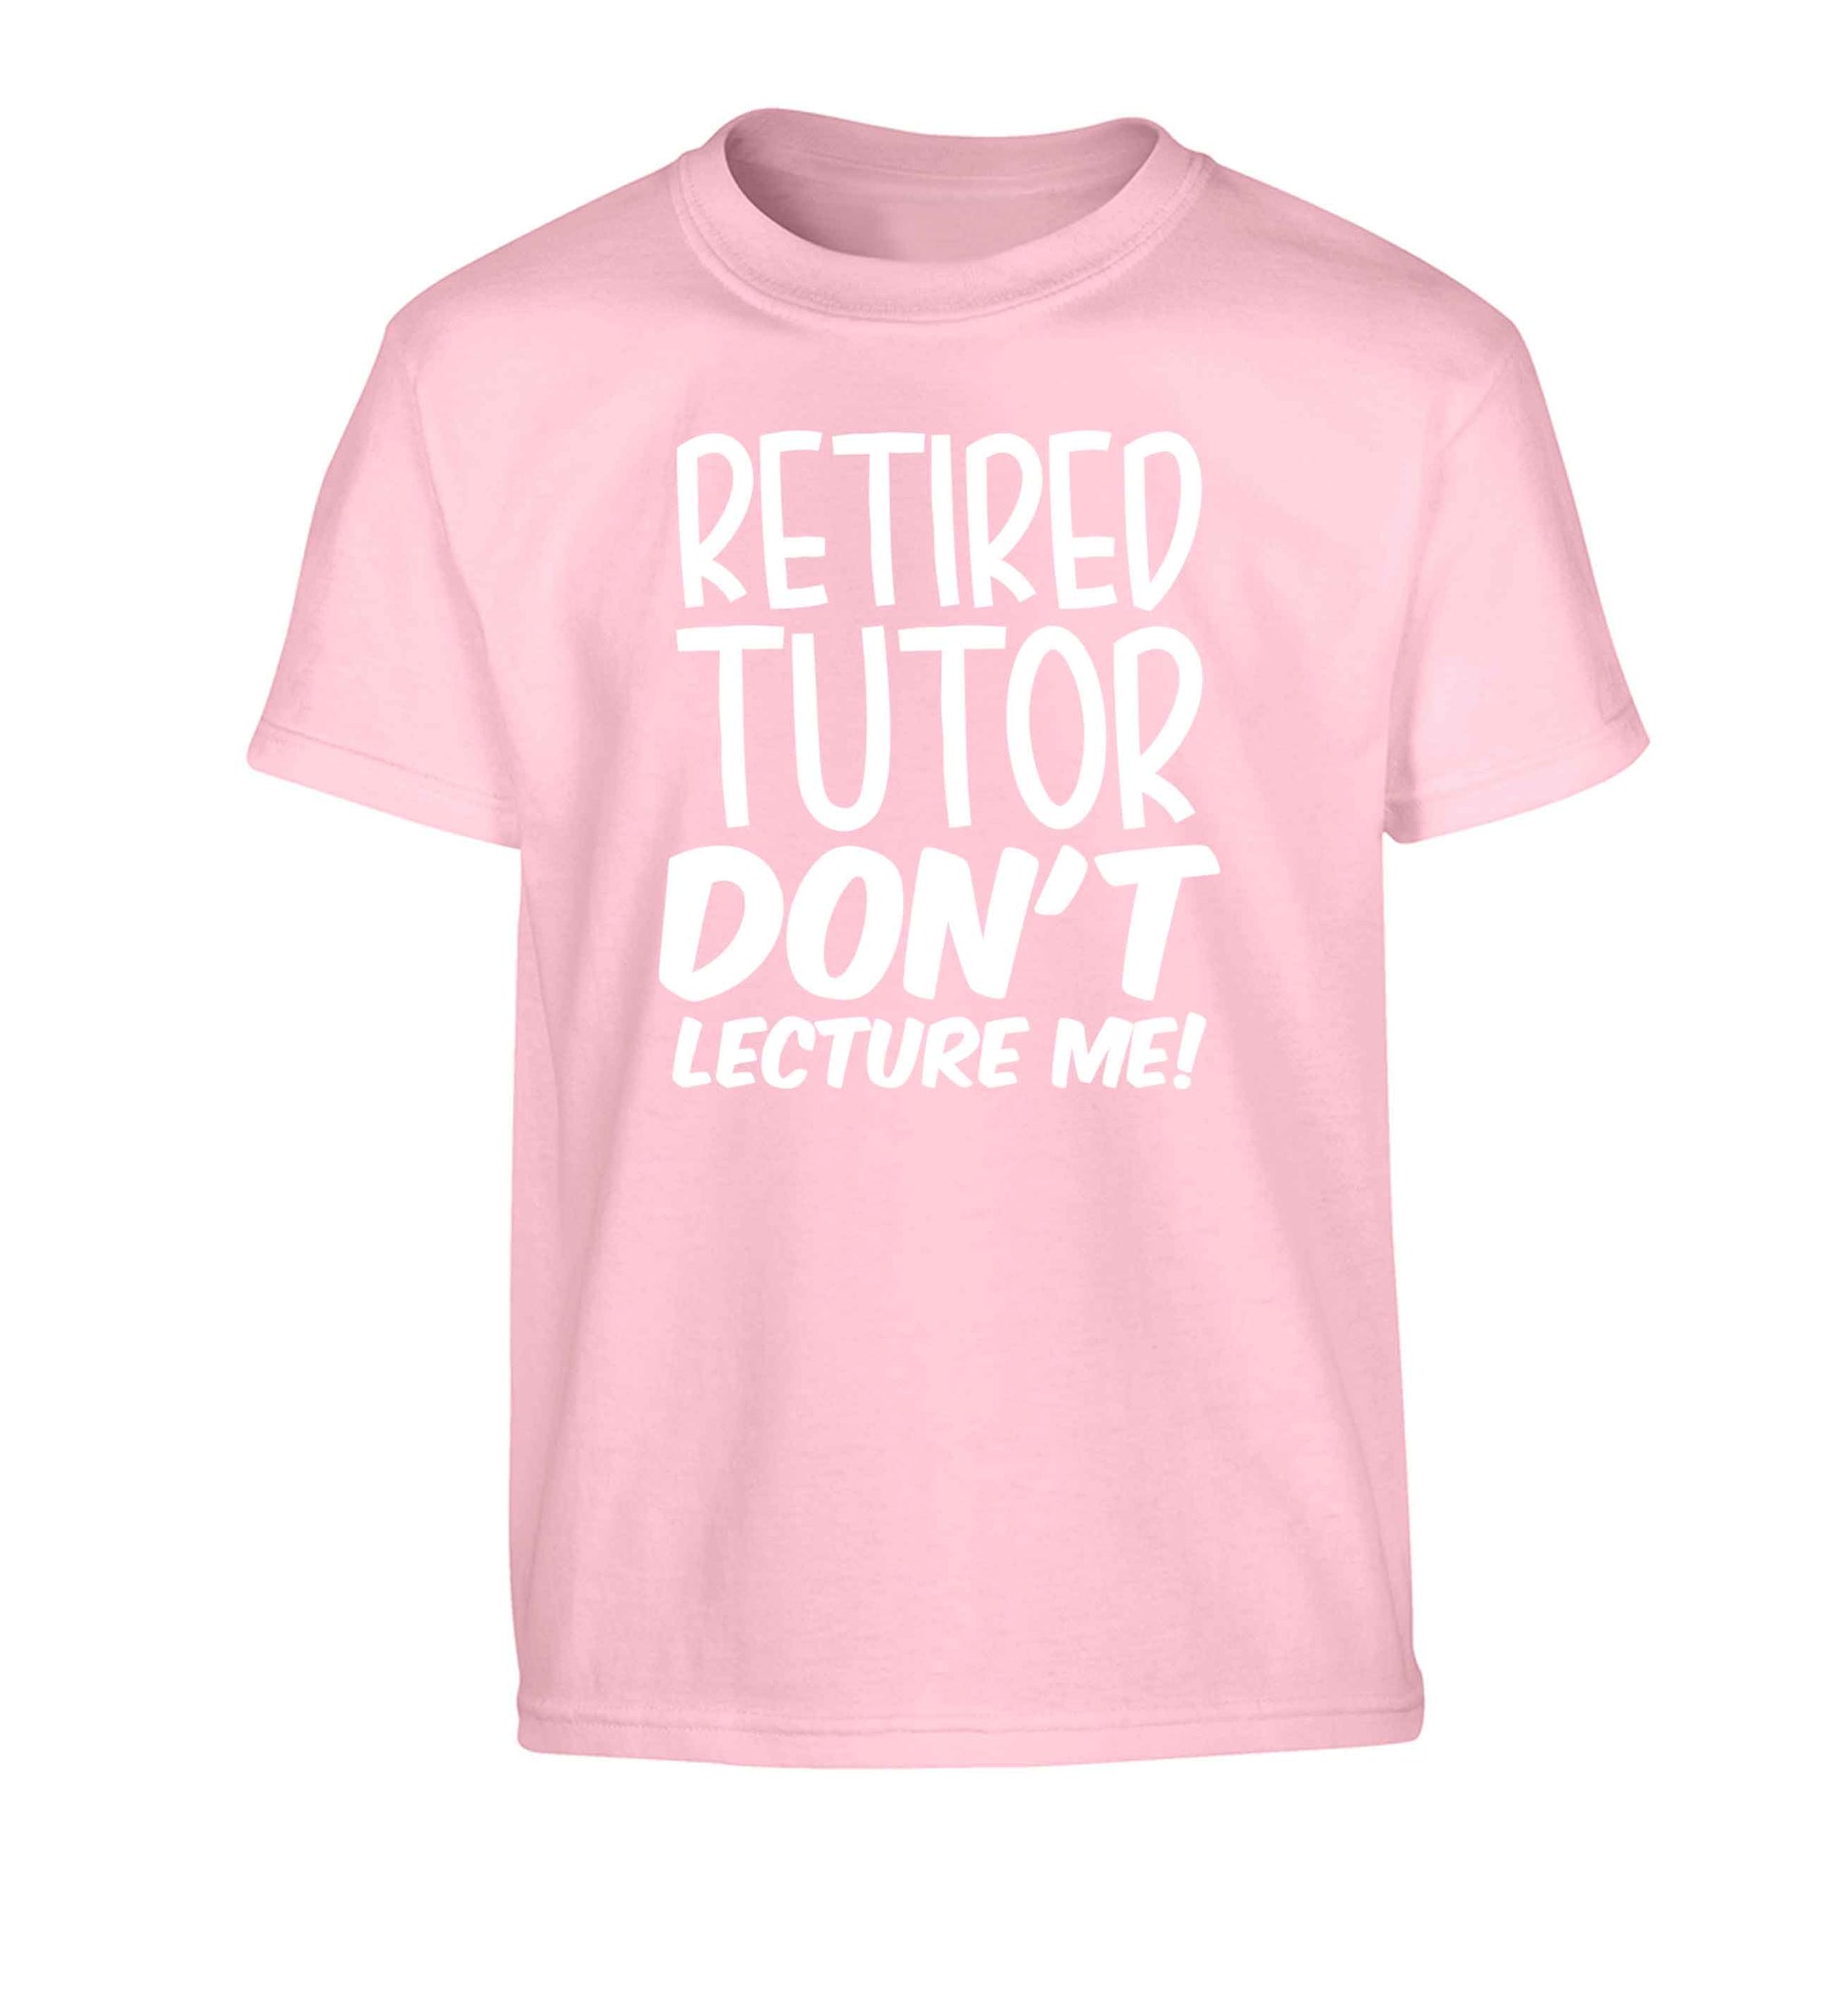 Retired tutor don't lecture me! Children's light pink Tshirt 12-13 Years